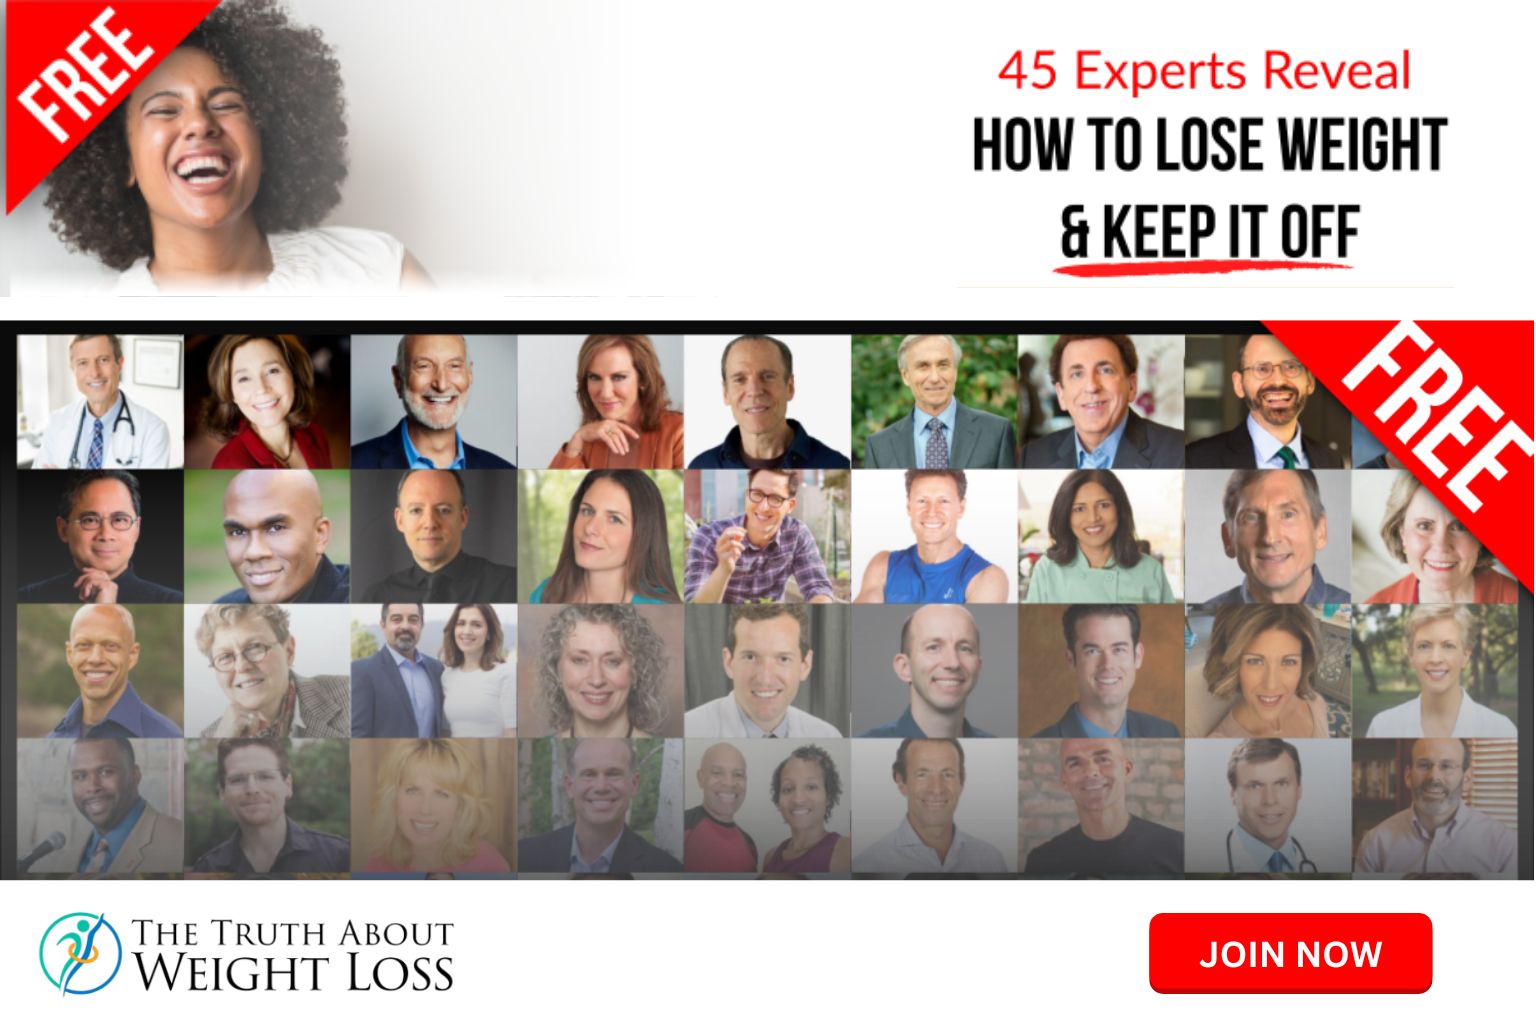 Click here to register for The Truth About Weight Loss online summit. Learn from 45 of the world's top experts for FREE.